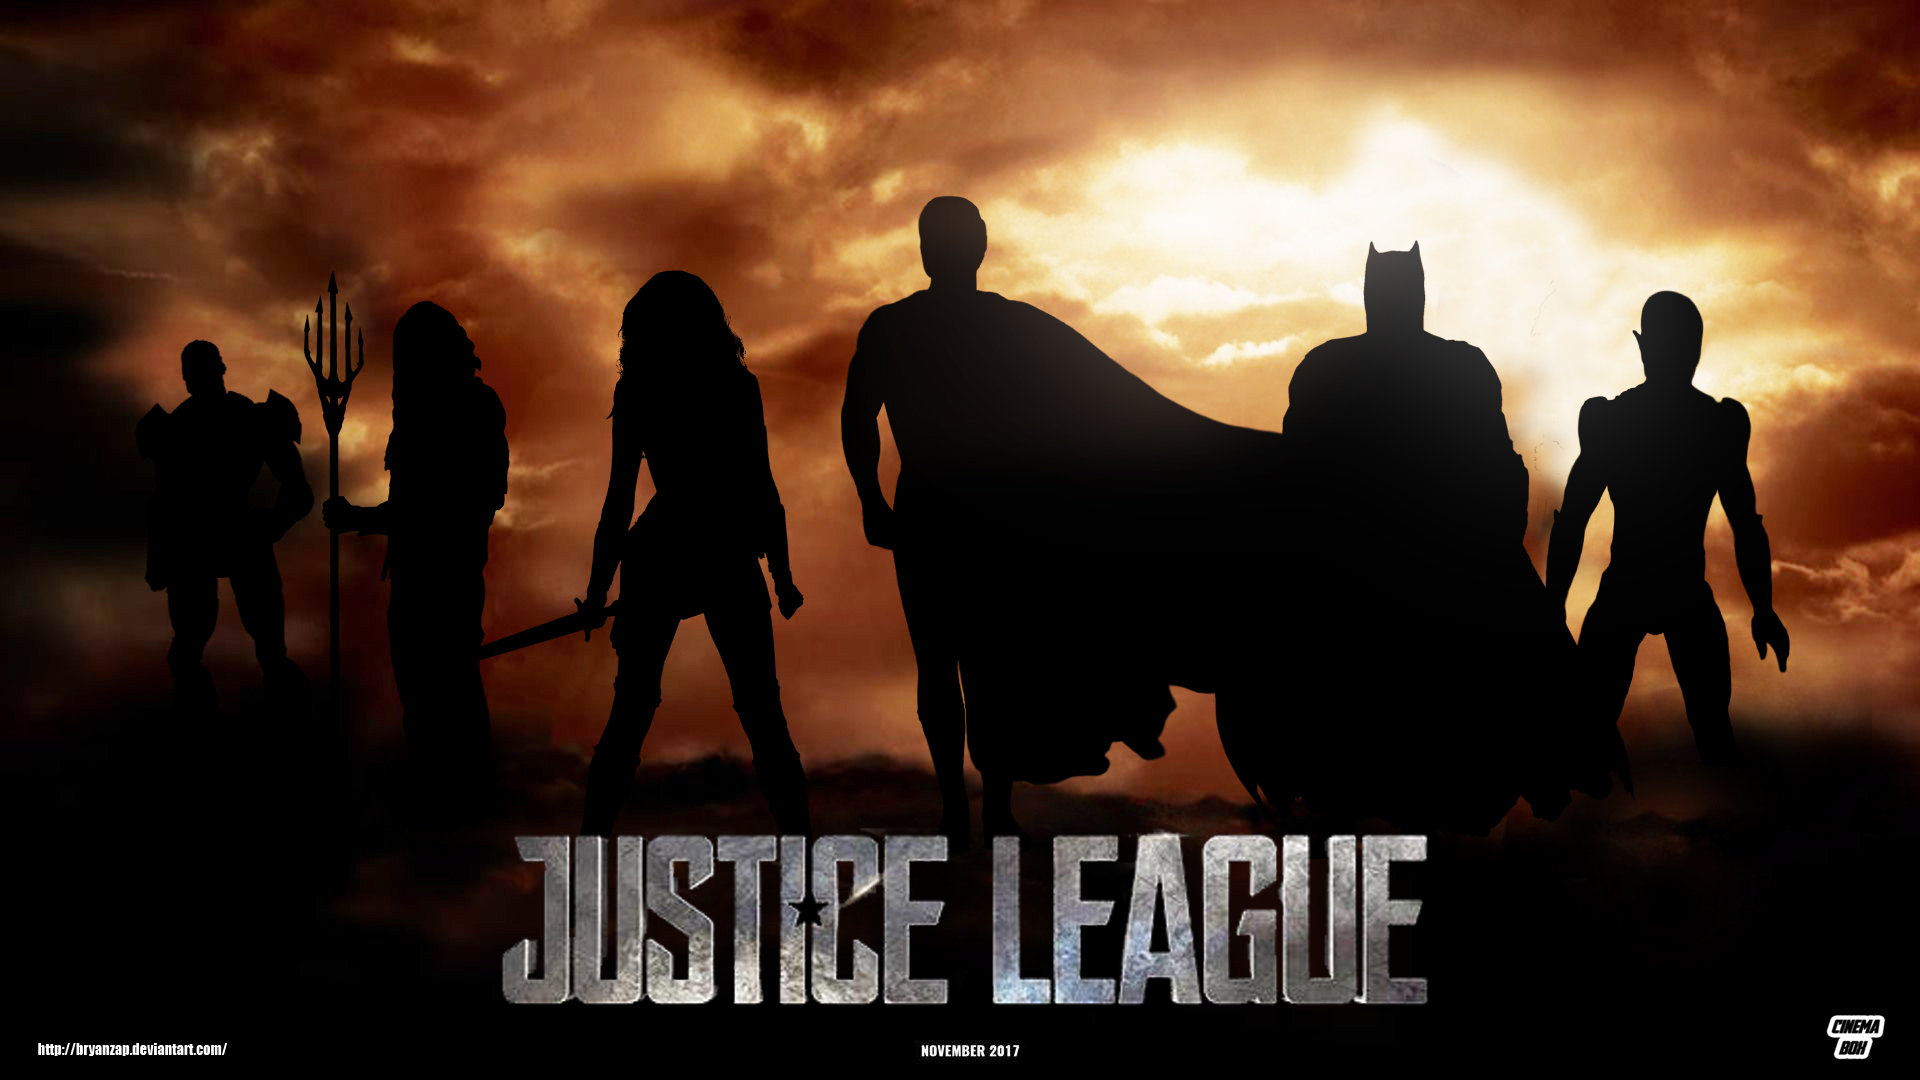 Download full hd 1080p Justice League movie (2017) desktop background ID:216039 for free